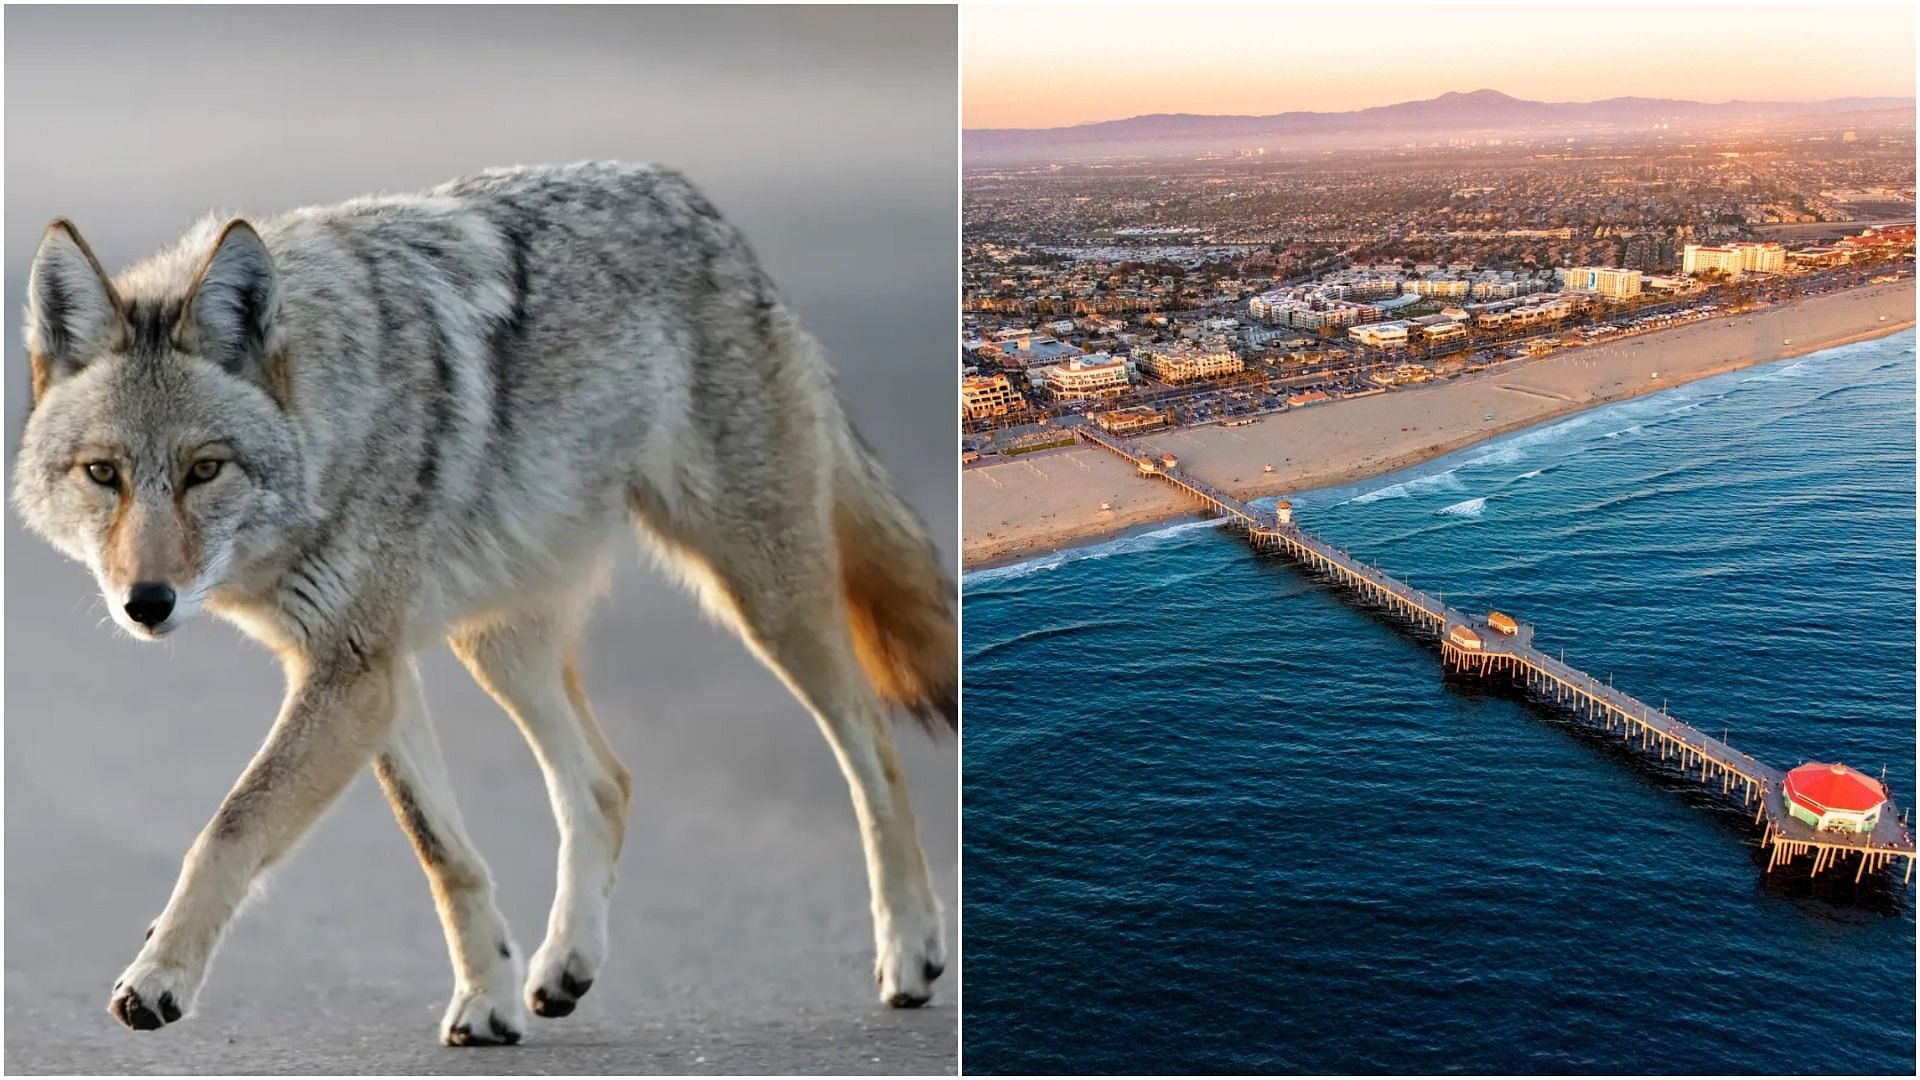 Coyote attacked a young girl near the Huntington Beach, California (Image via David C Stephens/Getty Images, and Art Wager/Getty Images)